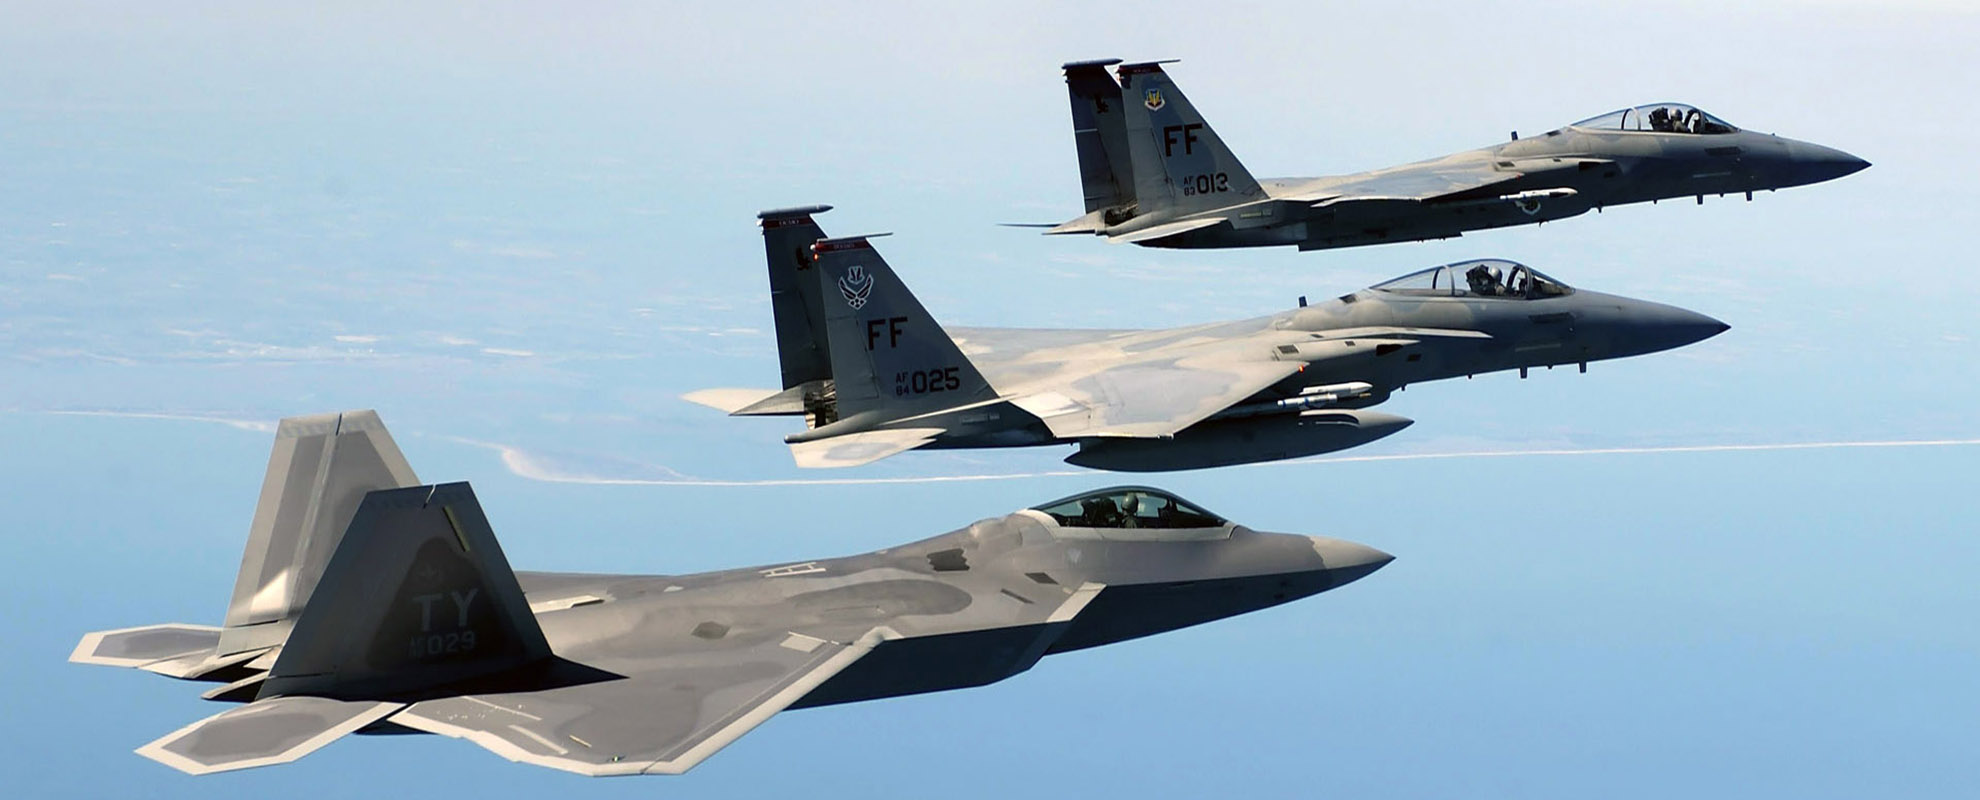 OVER THE ATLANTIC OCEAN -- An F/A-22 Raptor, foreground, flies in formation with two F-15 Eagles en route to a training area off the coast of Virginia on April 5. The F-22 is assigned to the 27th Fighter Squadron and the F-15s are assigned to the 1st Fighter Wing, both at Langley Air Force Base, Va. The Raptor is on loan from Tyndall AFB, Fla. (U.S. Air Force photo by Tech. Sgt. Ben Bloker)